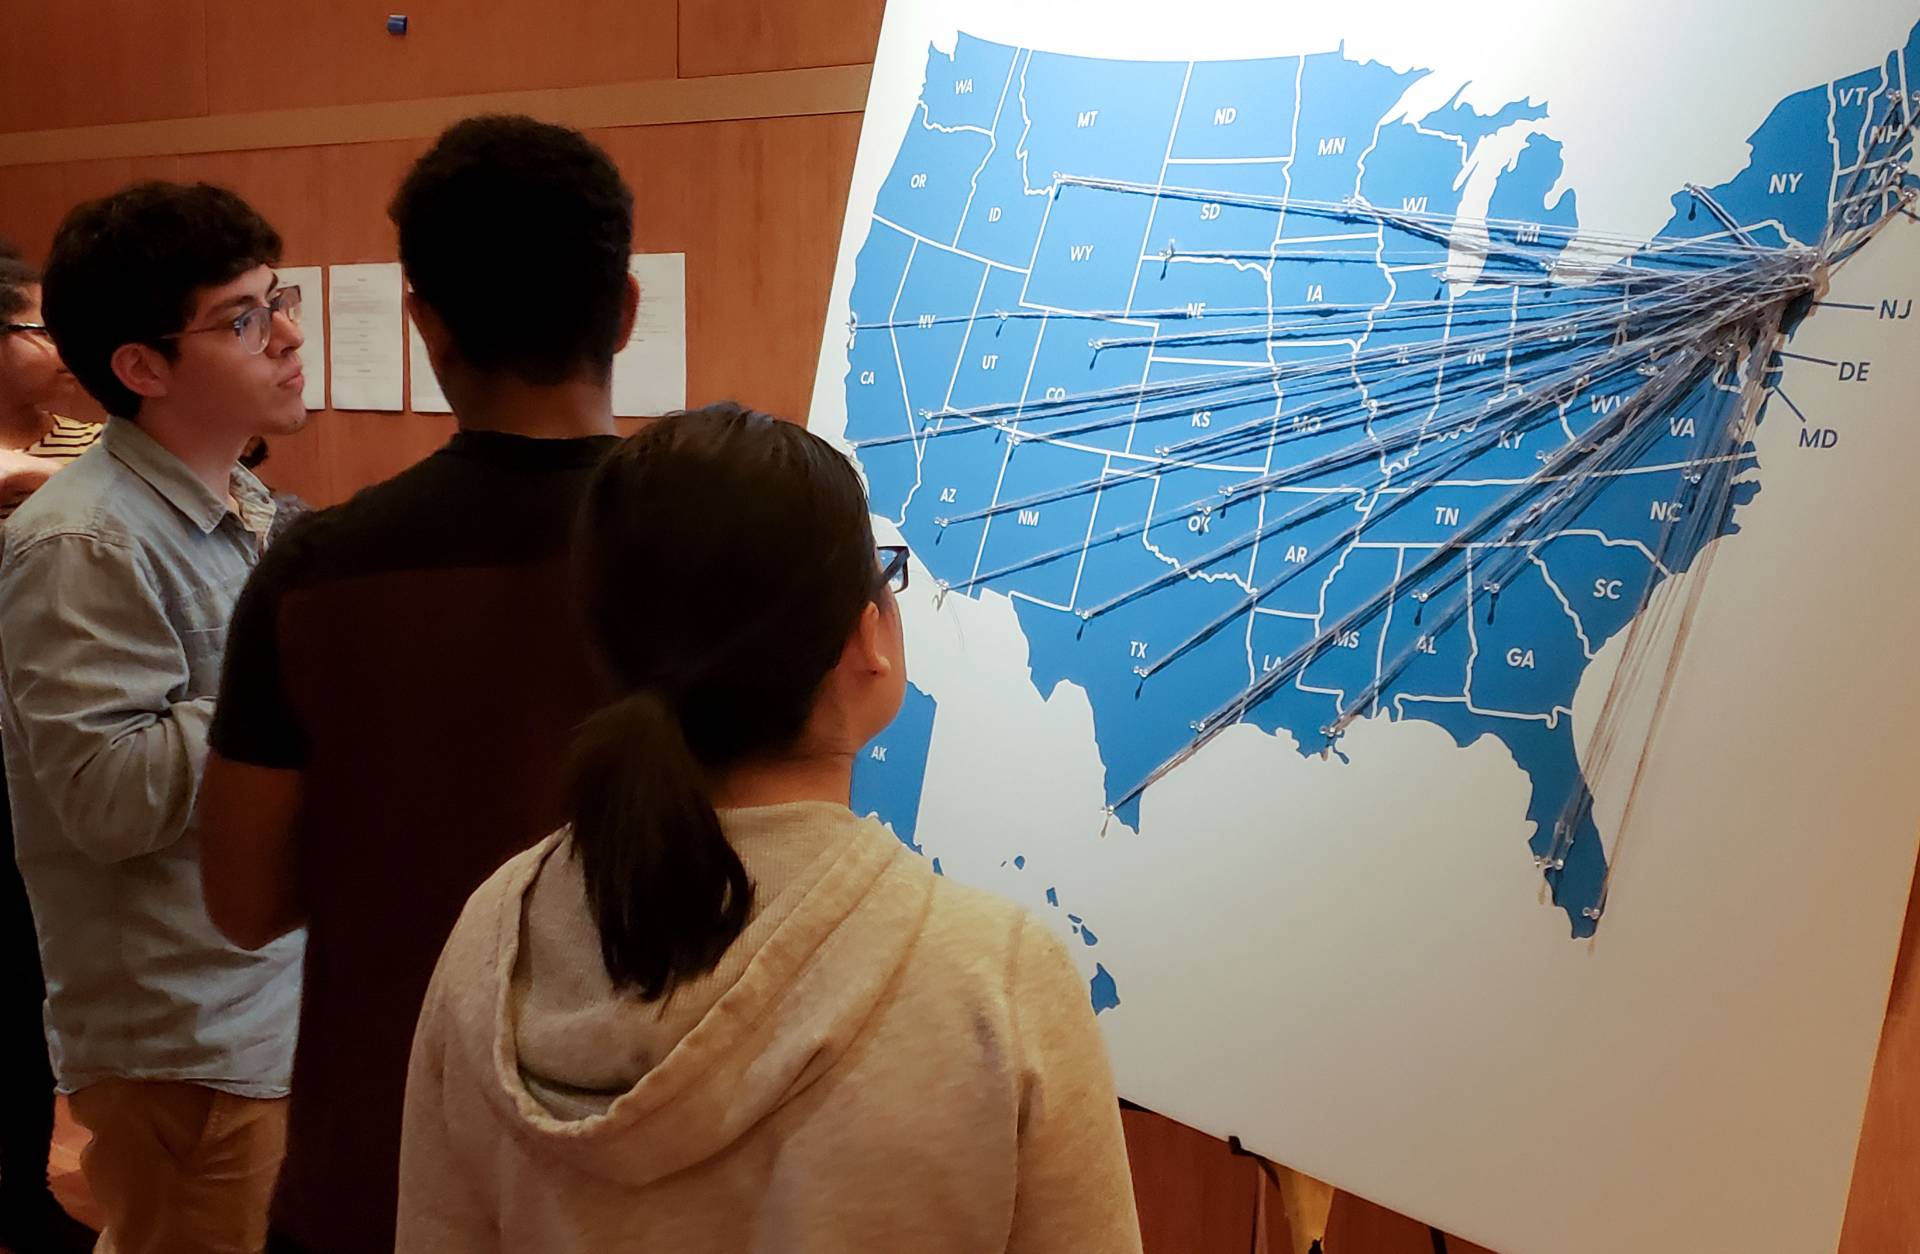 Students looking at map of US with strings and pins marking Breakout Princeton trip locations